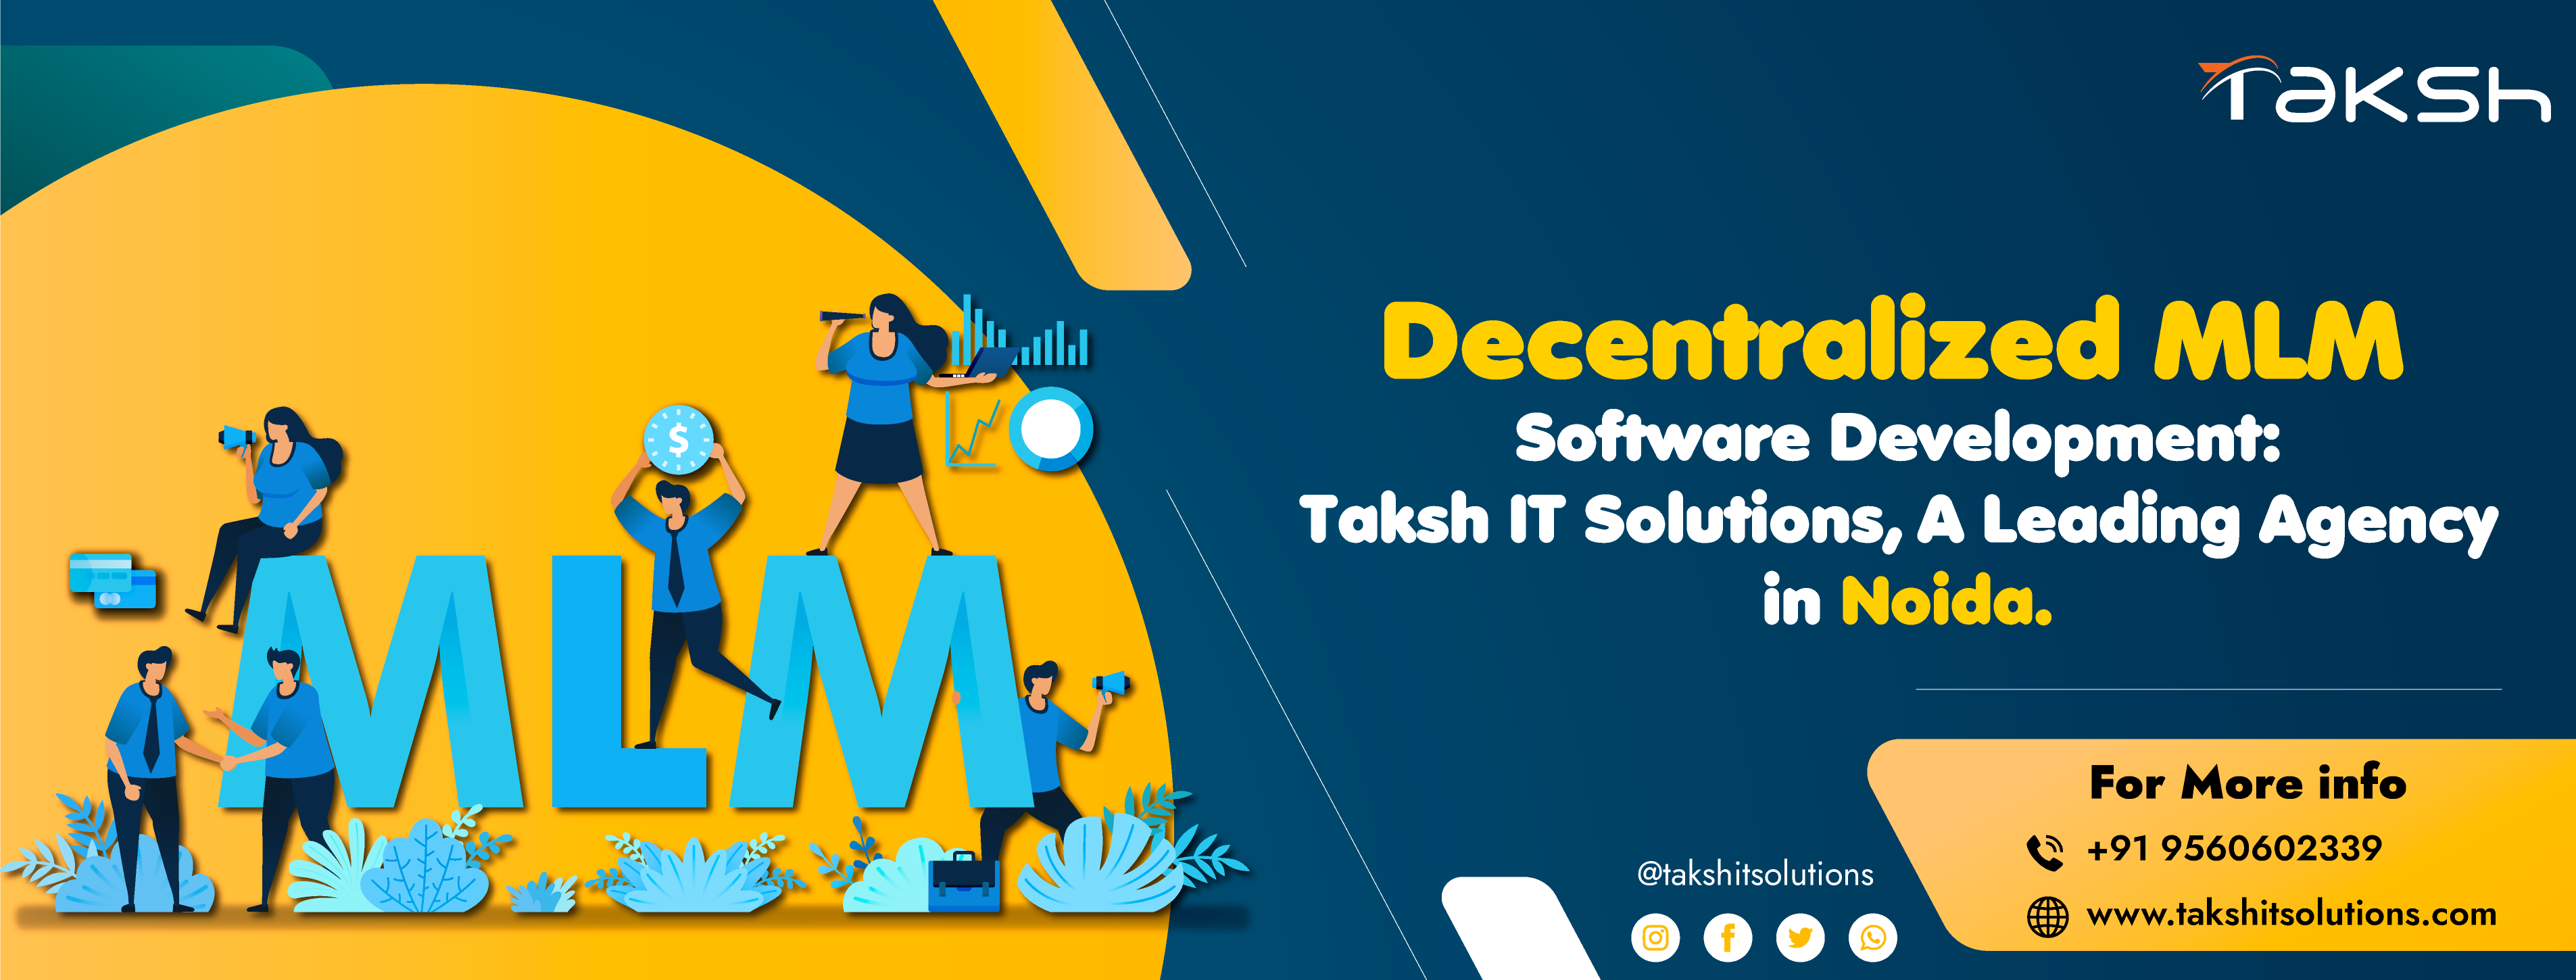 Decentralized MLM Software Development: Taksh IT Solutions, A Leading Agency in Noida